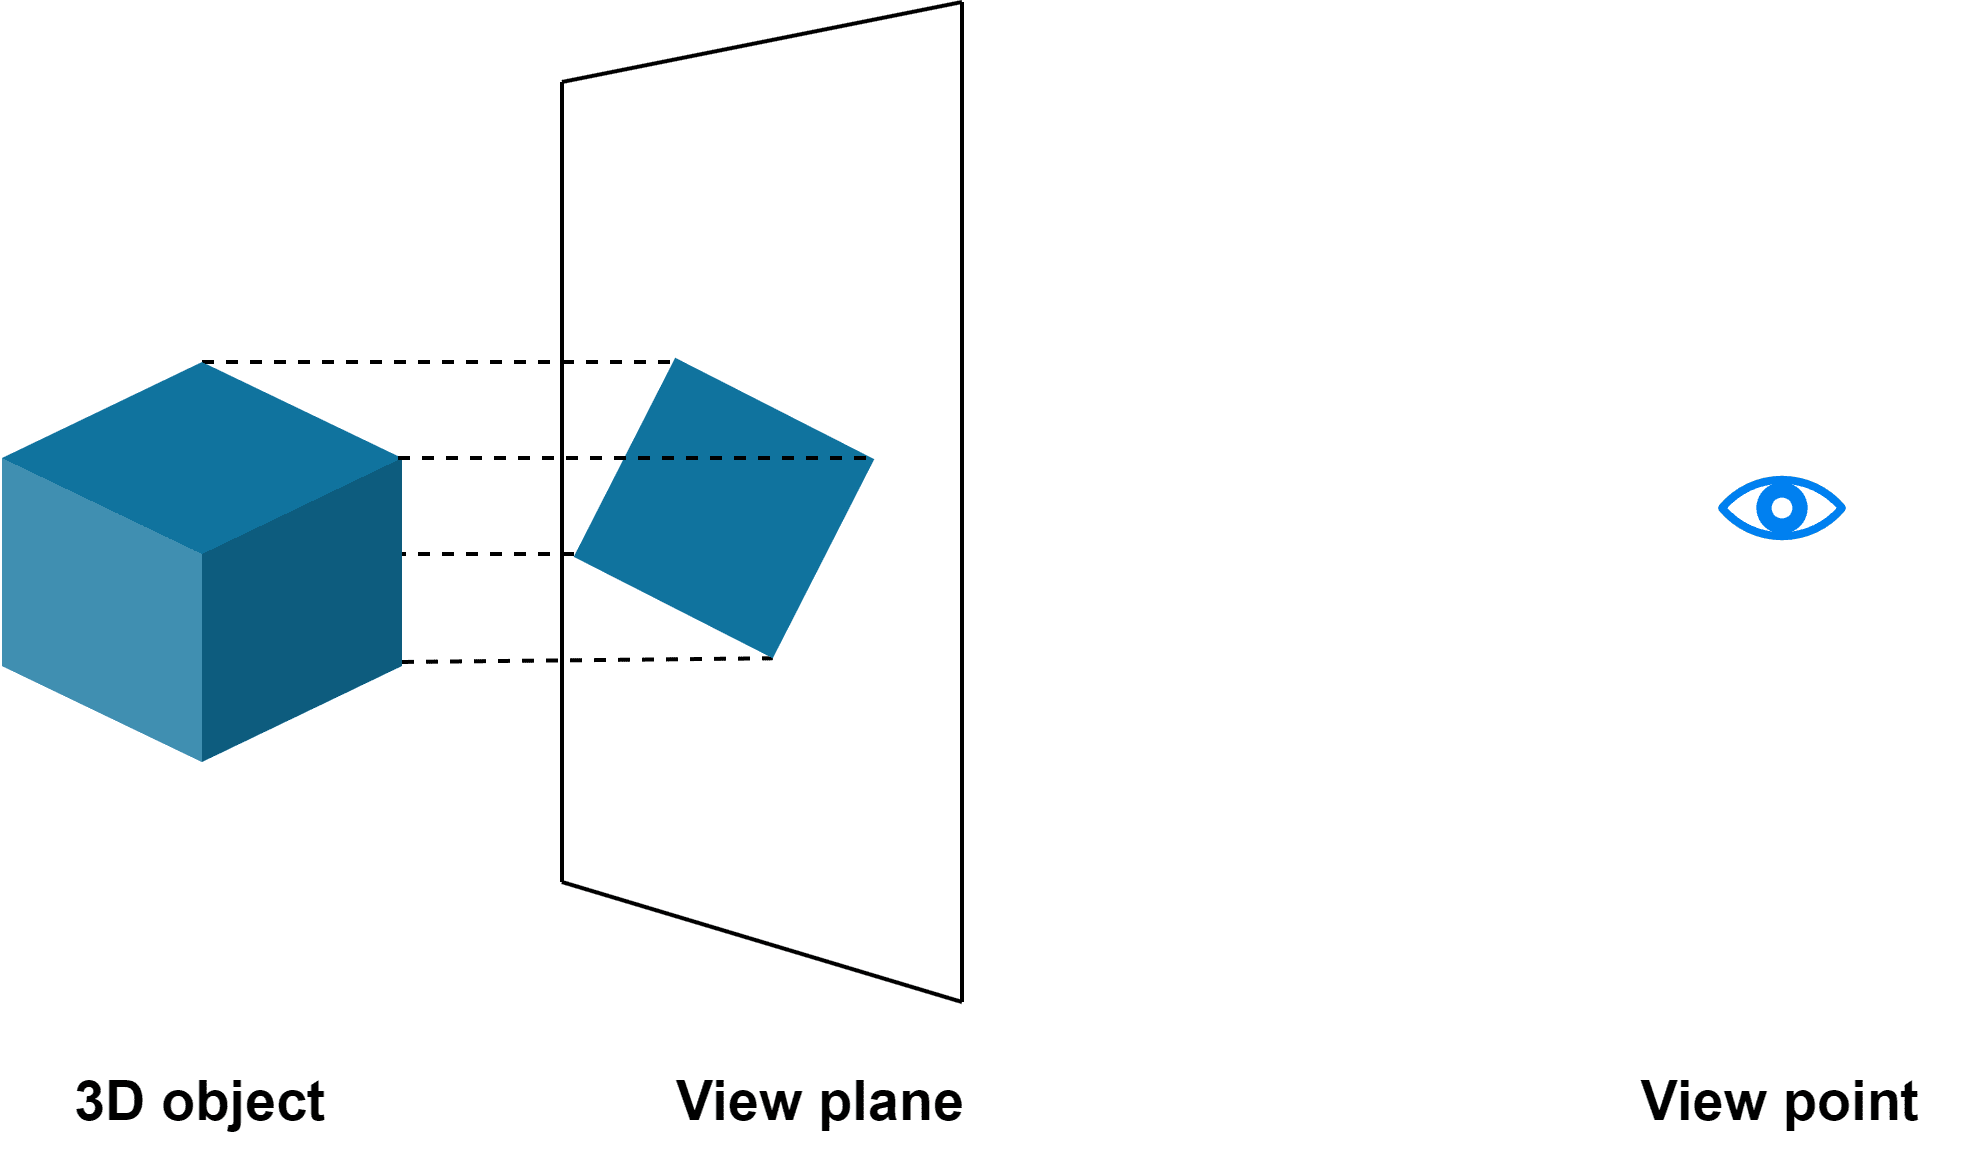 This is an example of parallel projection